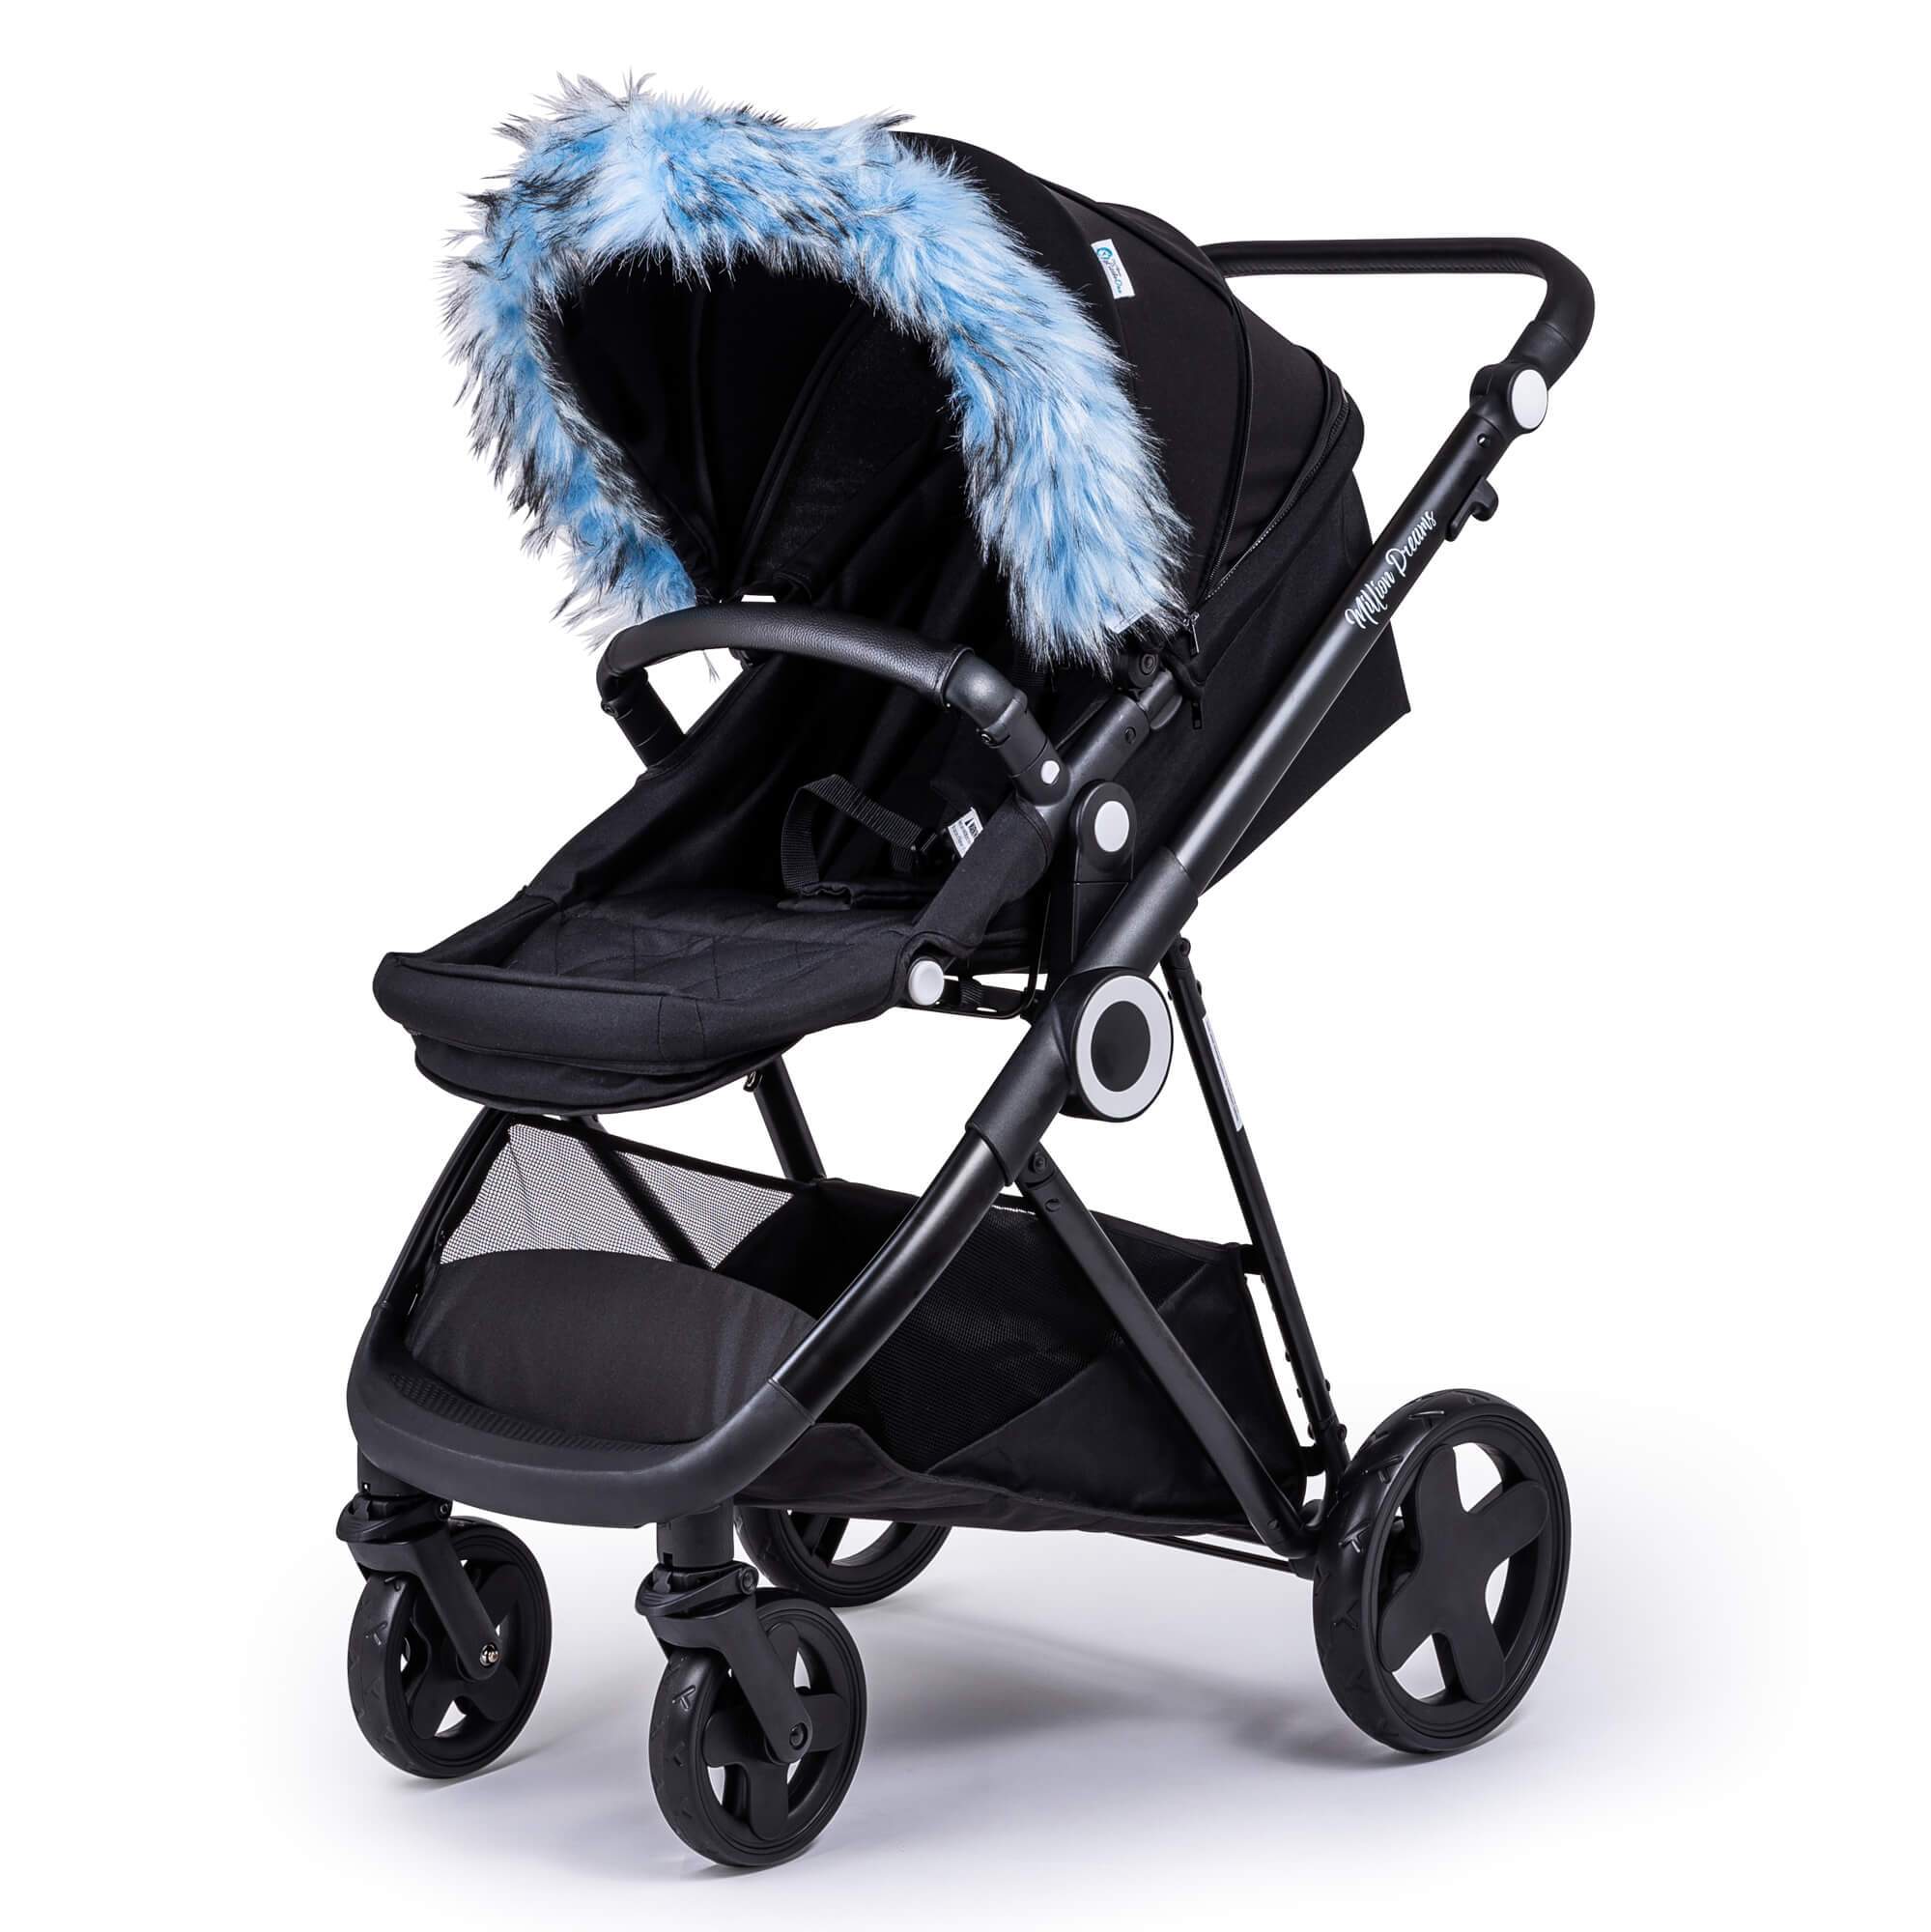 Pram Fur Hood Trim Attachment for Pushchair Compatible with Baby Jogger - Light Blue / Fits All Models | For Your Little One